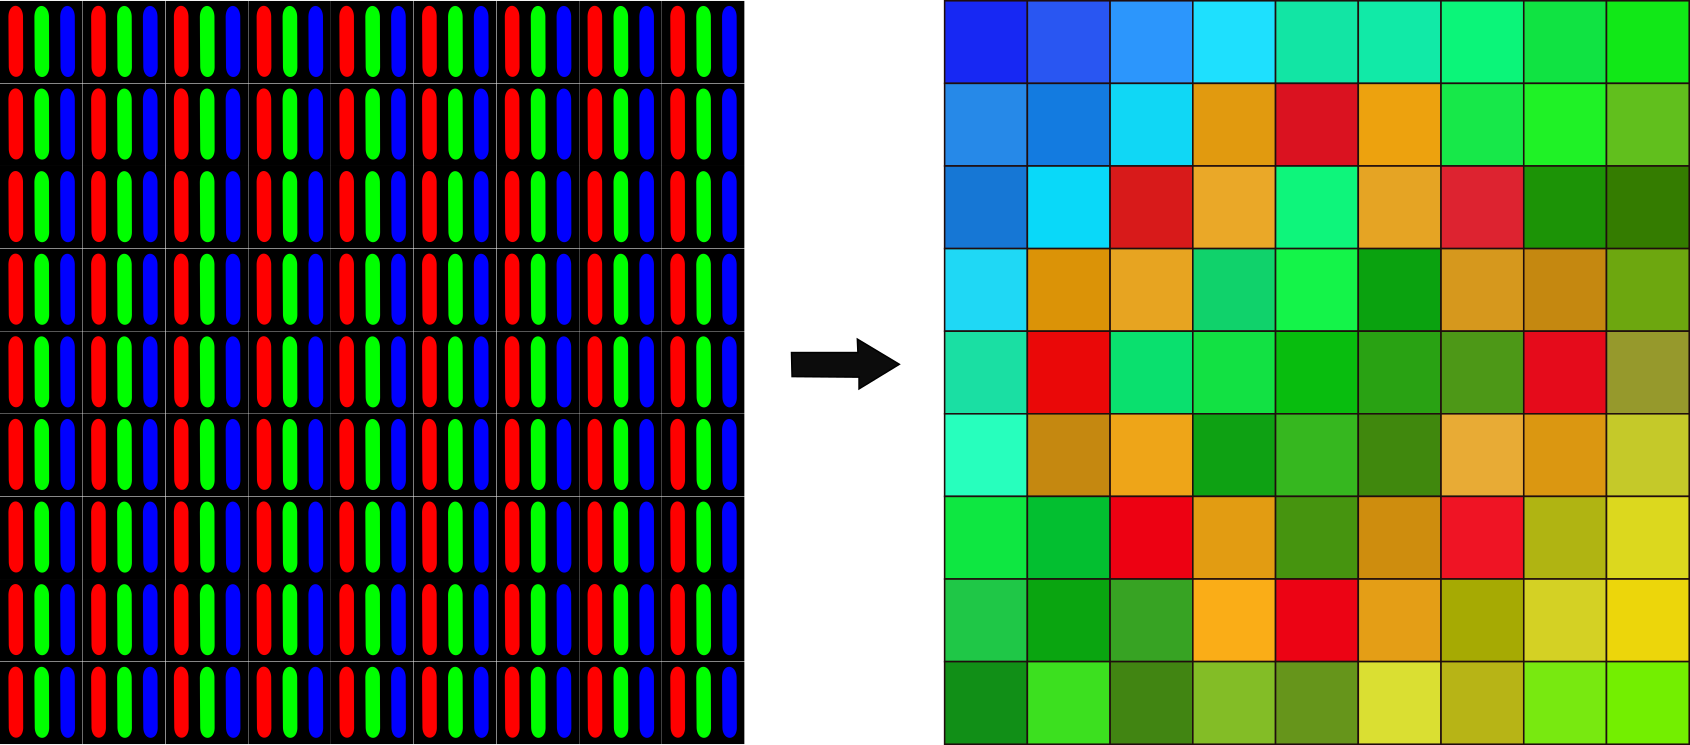 An array of pixels composed of red, green, and blue LEDs